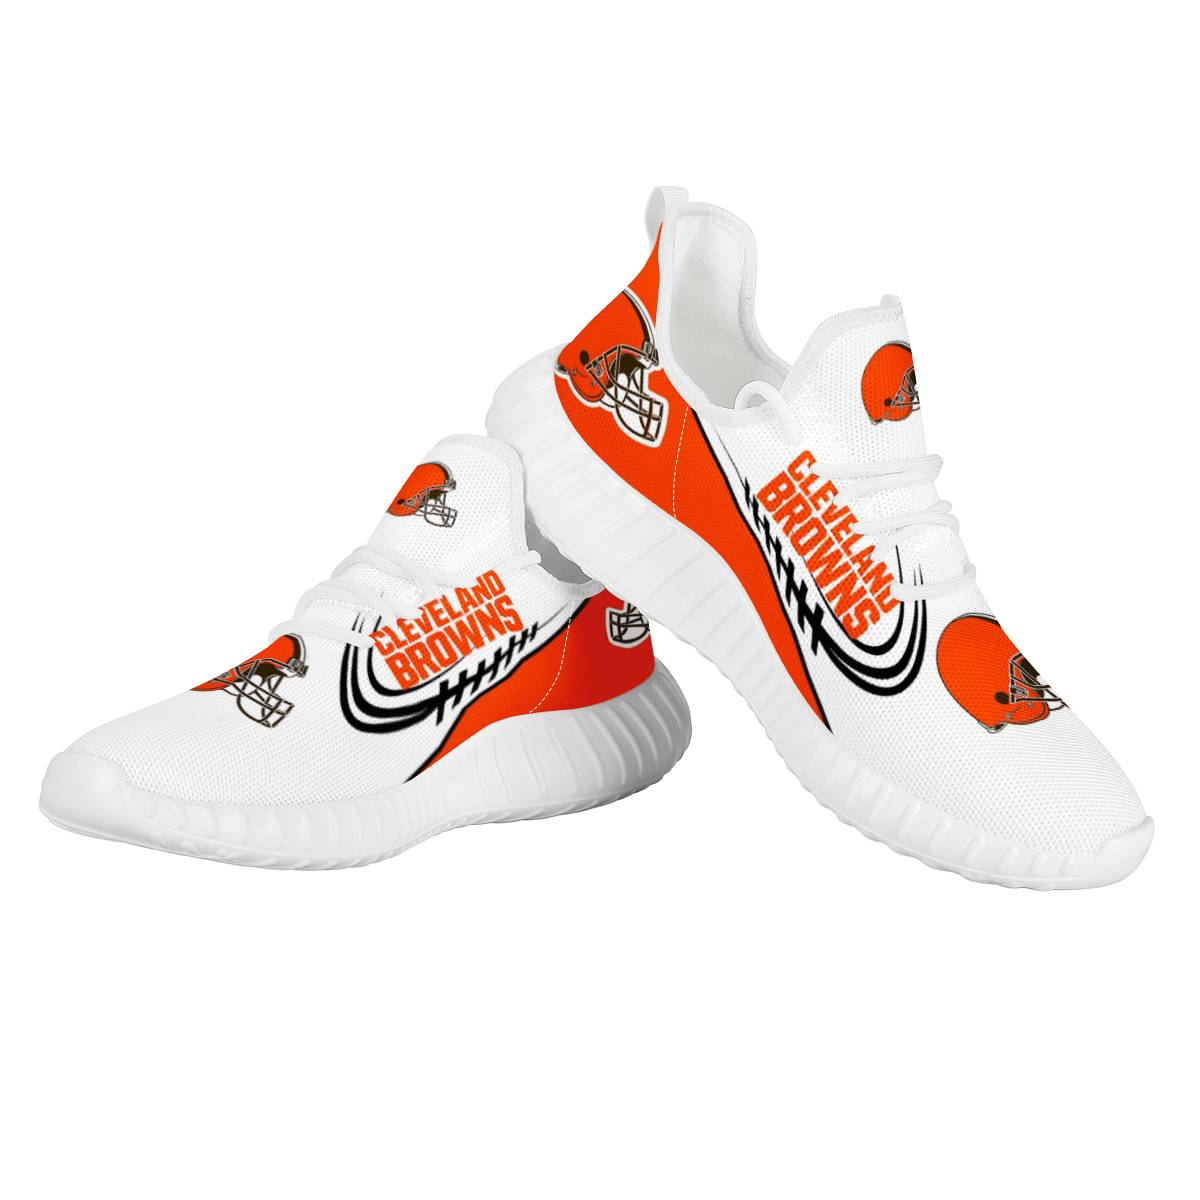 Women's Cleveland Browns Mesh Knit Sneakers/Shoes 008